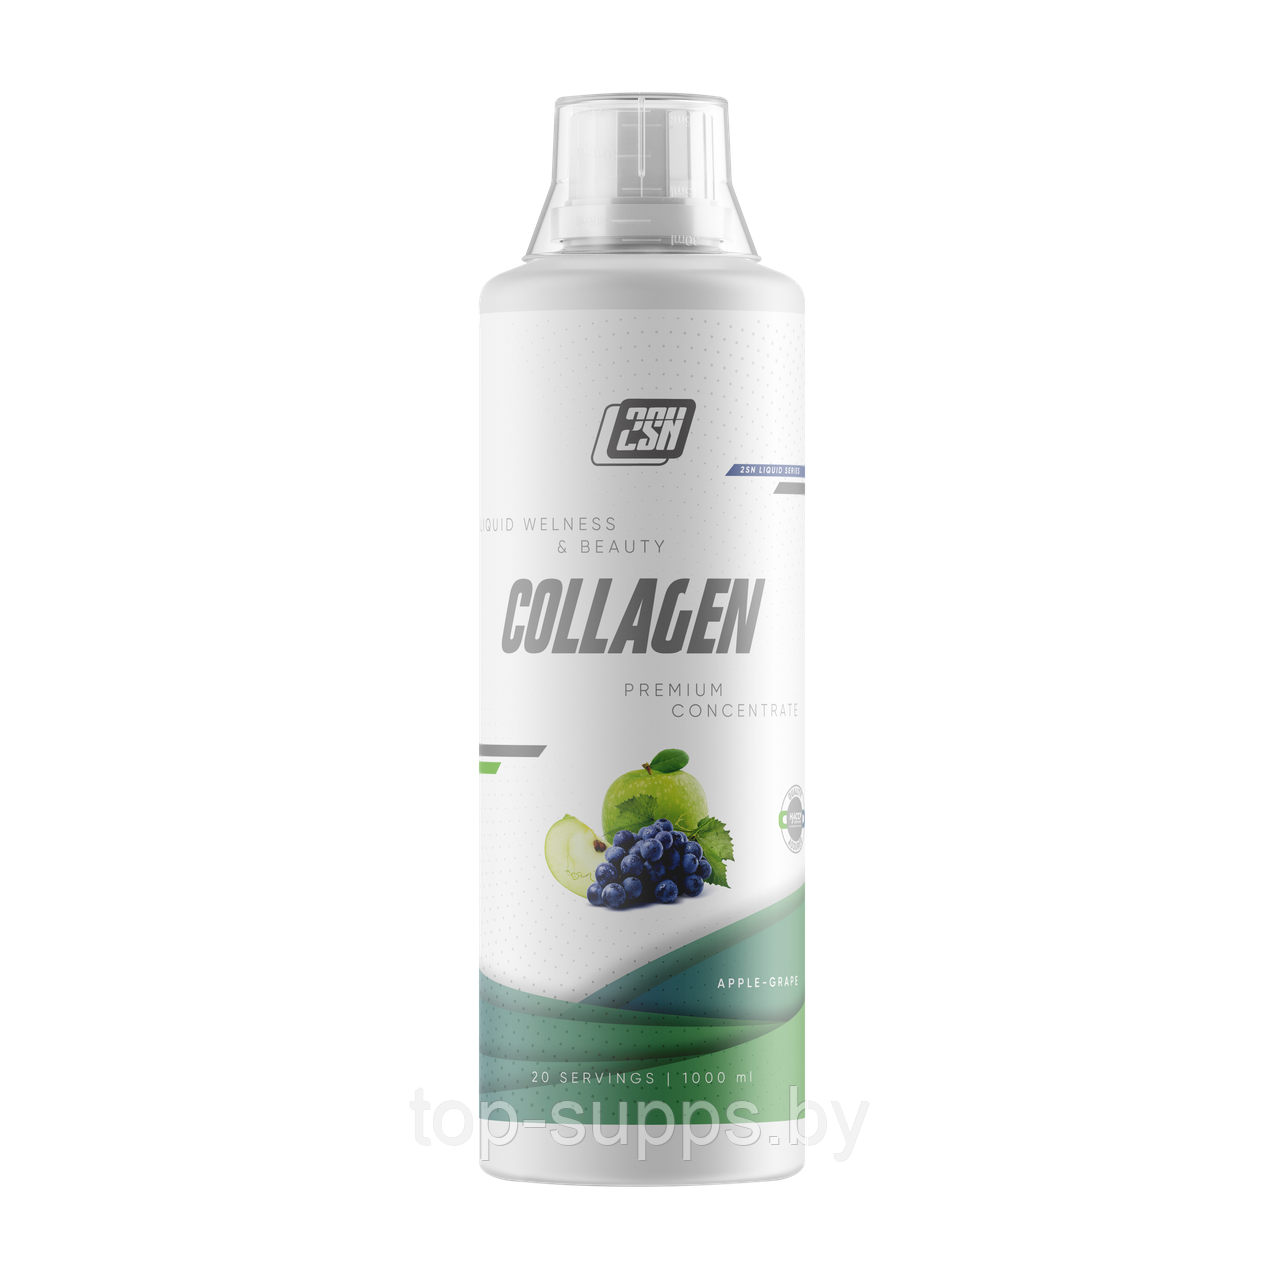 2SN Collagen Liguid Wellness from 2SN, 1000 ml (40 servings) - фото 1 - id-p208806377